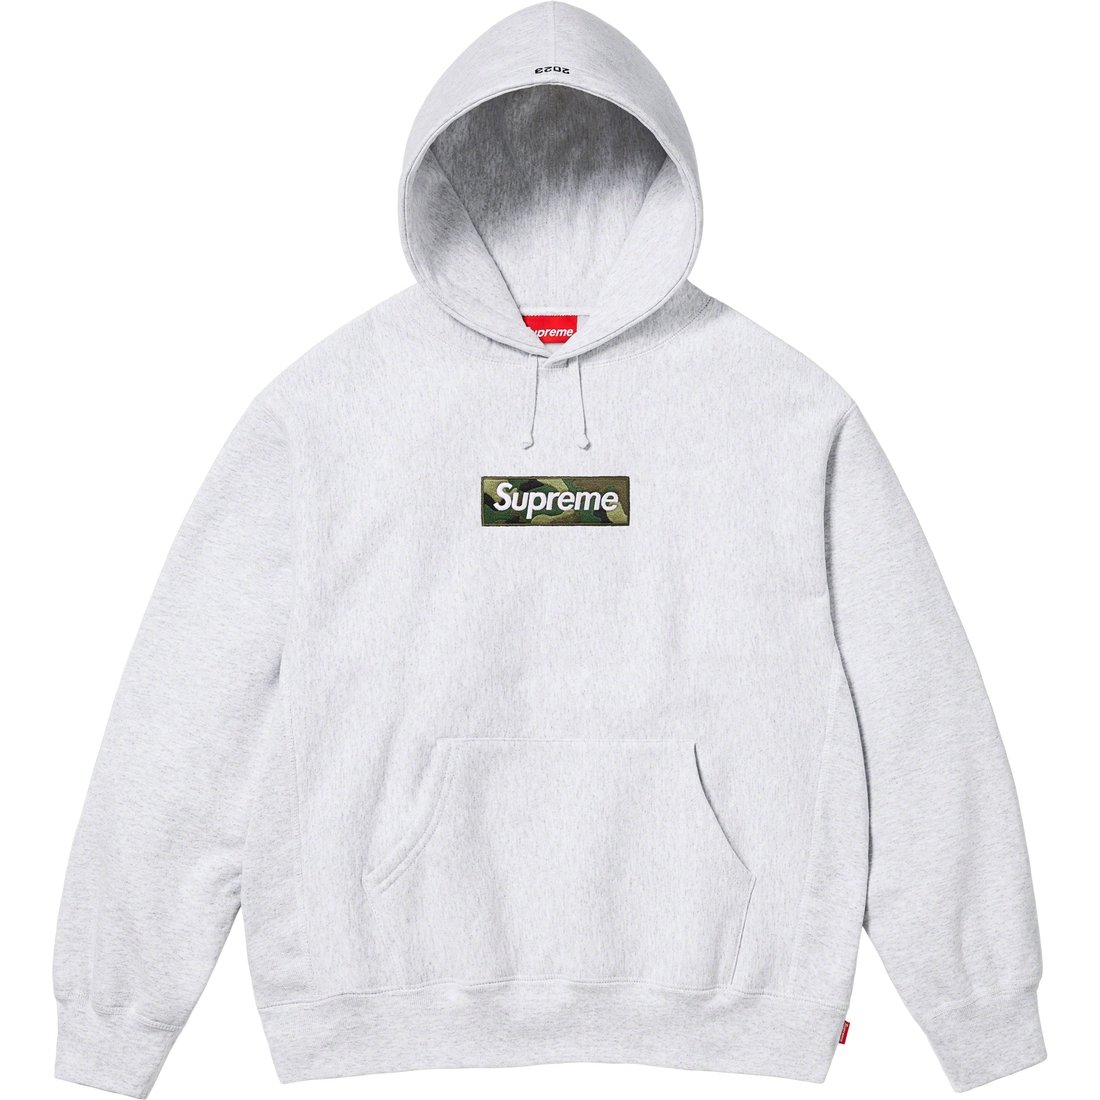 Whats your favorite color? - Box Logo Hooded Sweatshirt - Poll ...